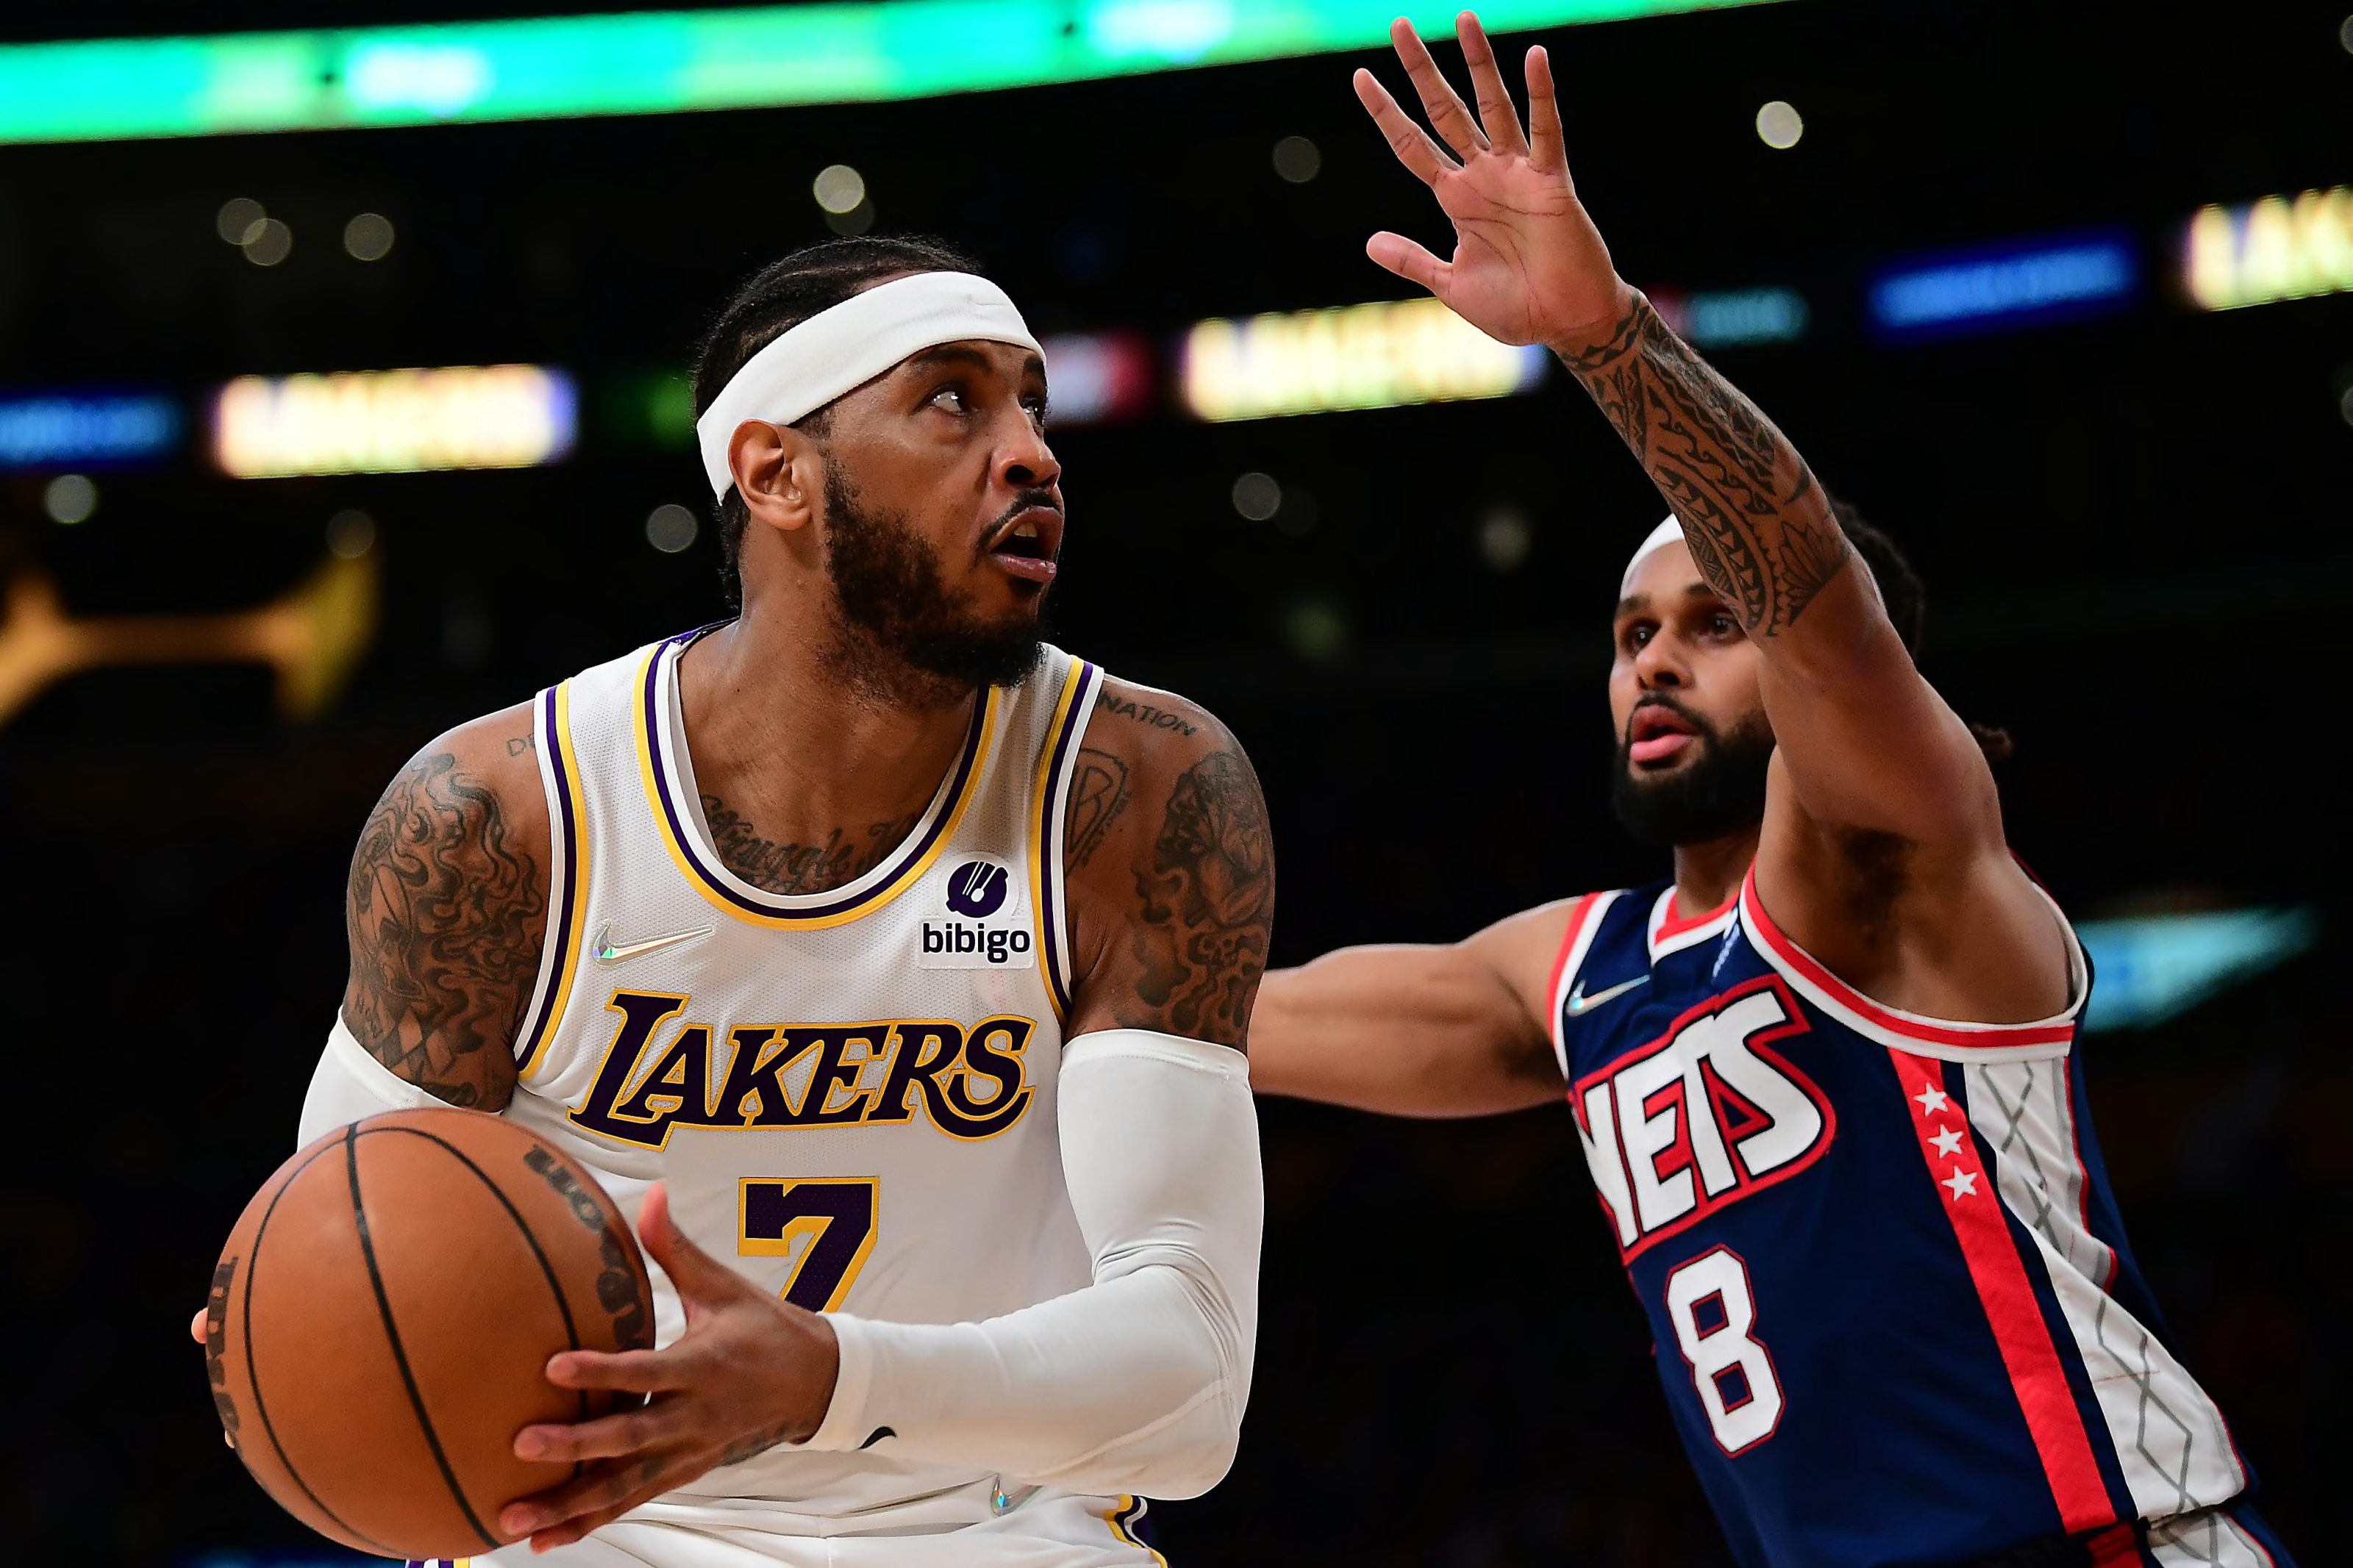 Brooklyn Nets: Patty Mills, Los Angeles Lakers: Carmelo Anthony